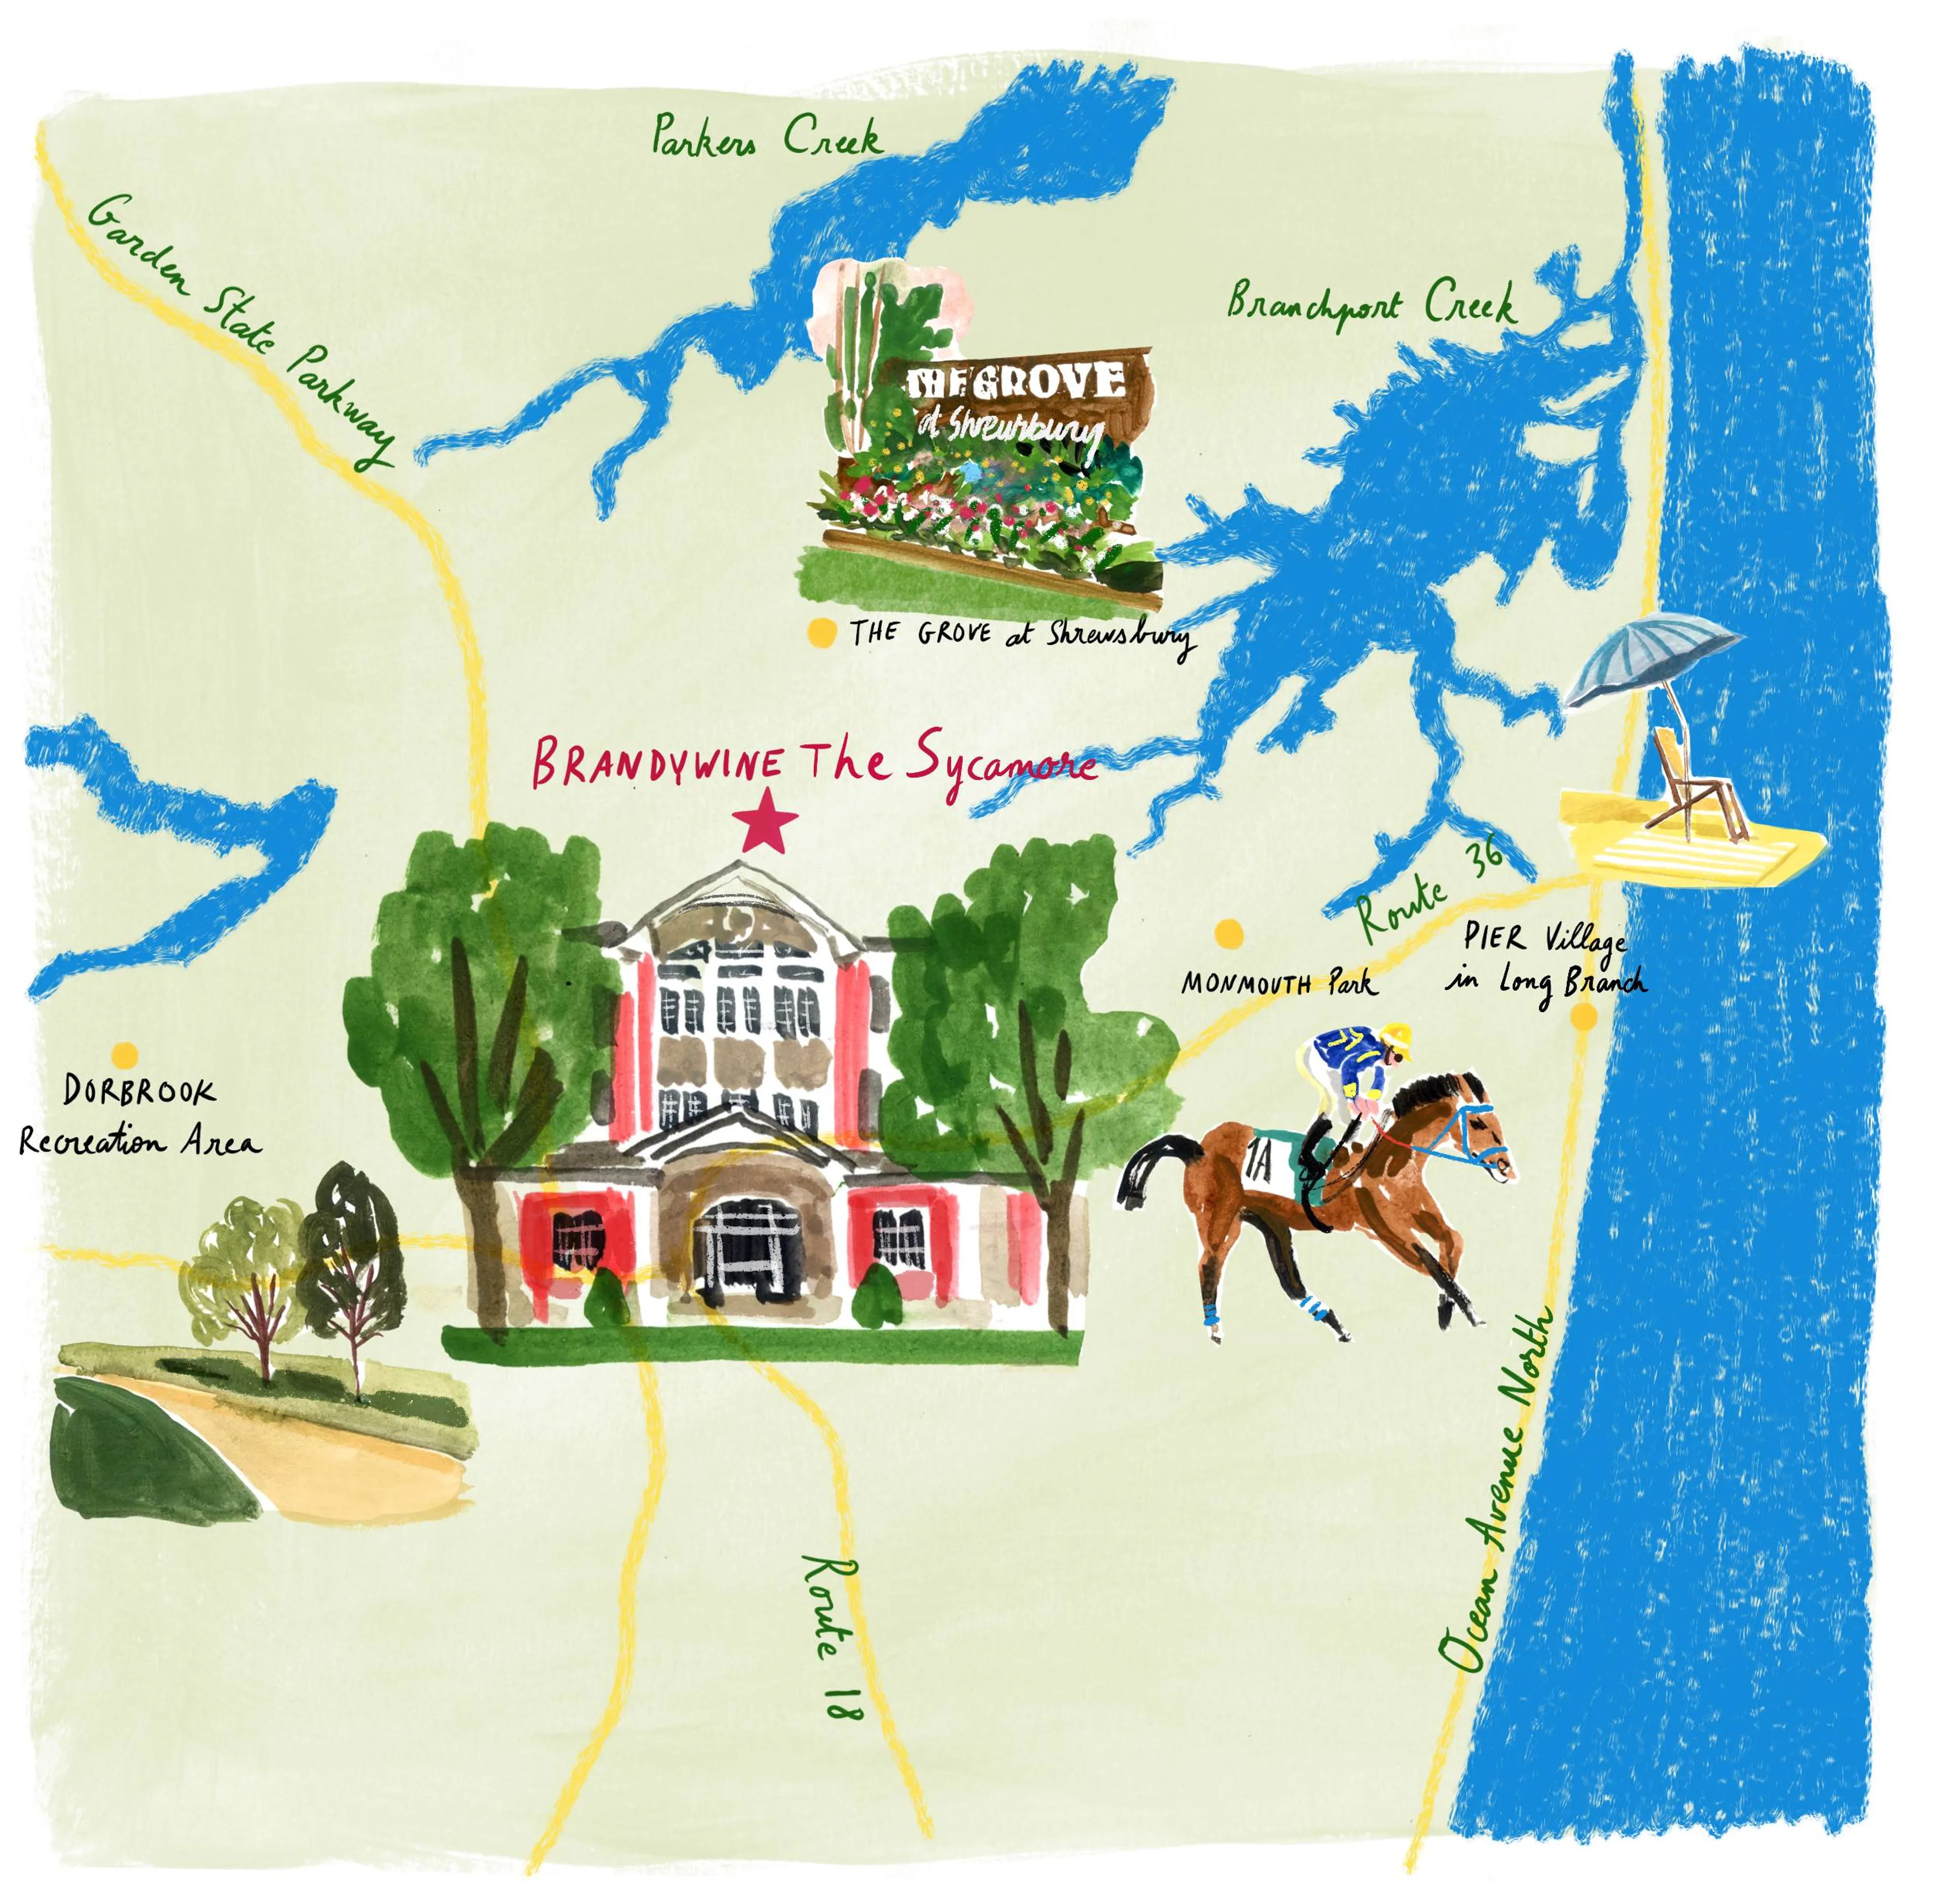 Hand-illustrated map of major road, landmarks and beaches surrounding Brandywine at The Sycamore in Shrewbury, NJ